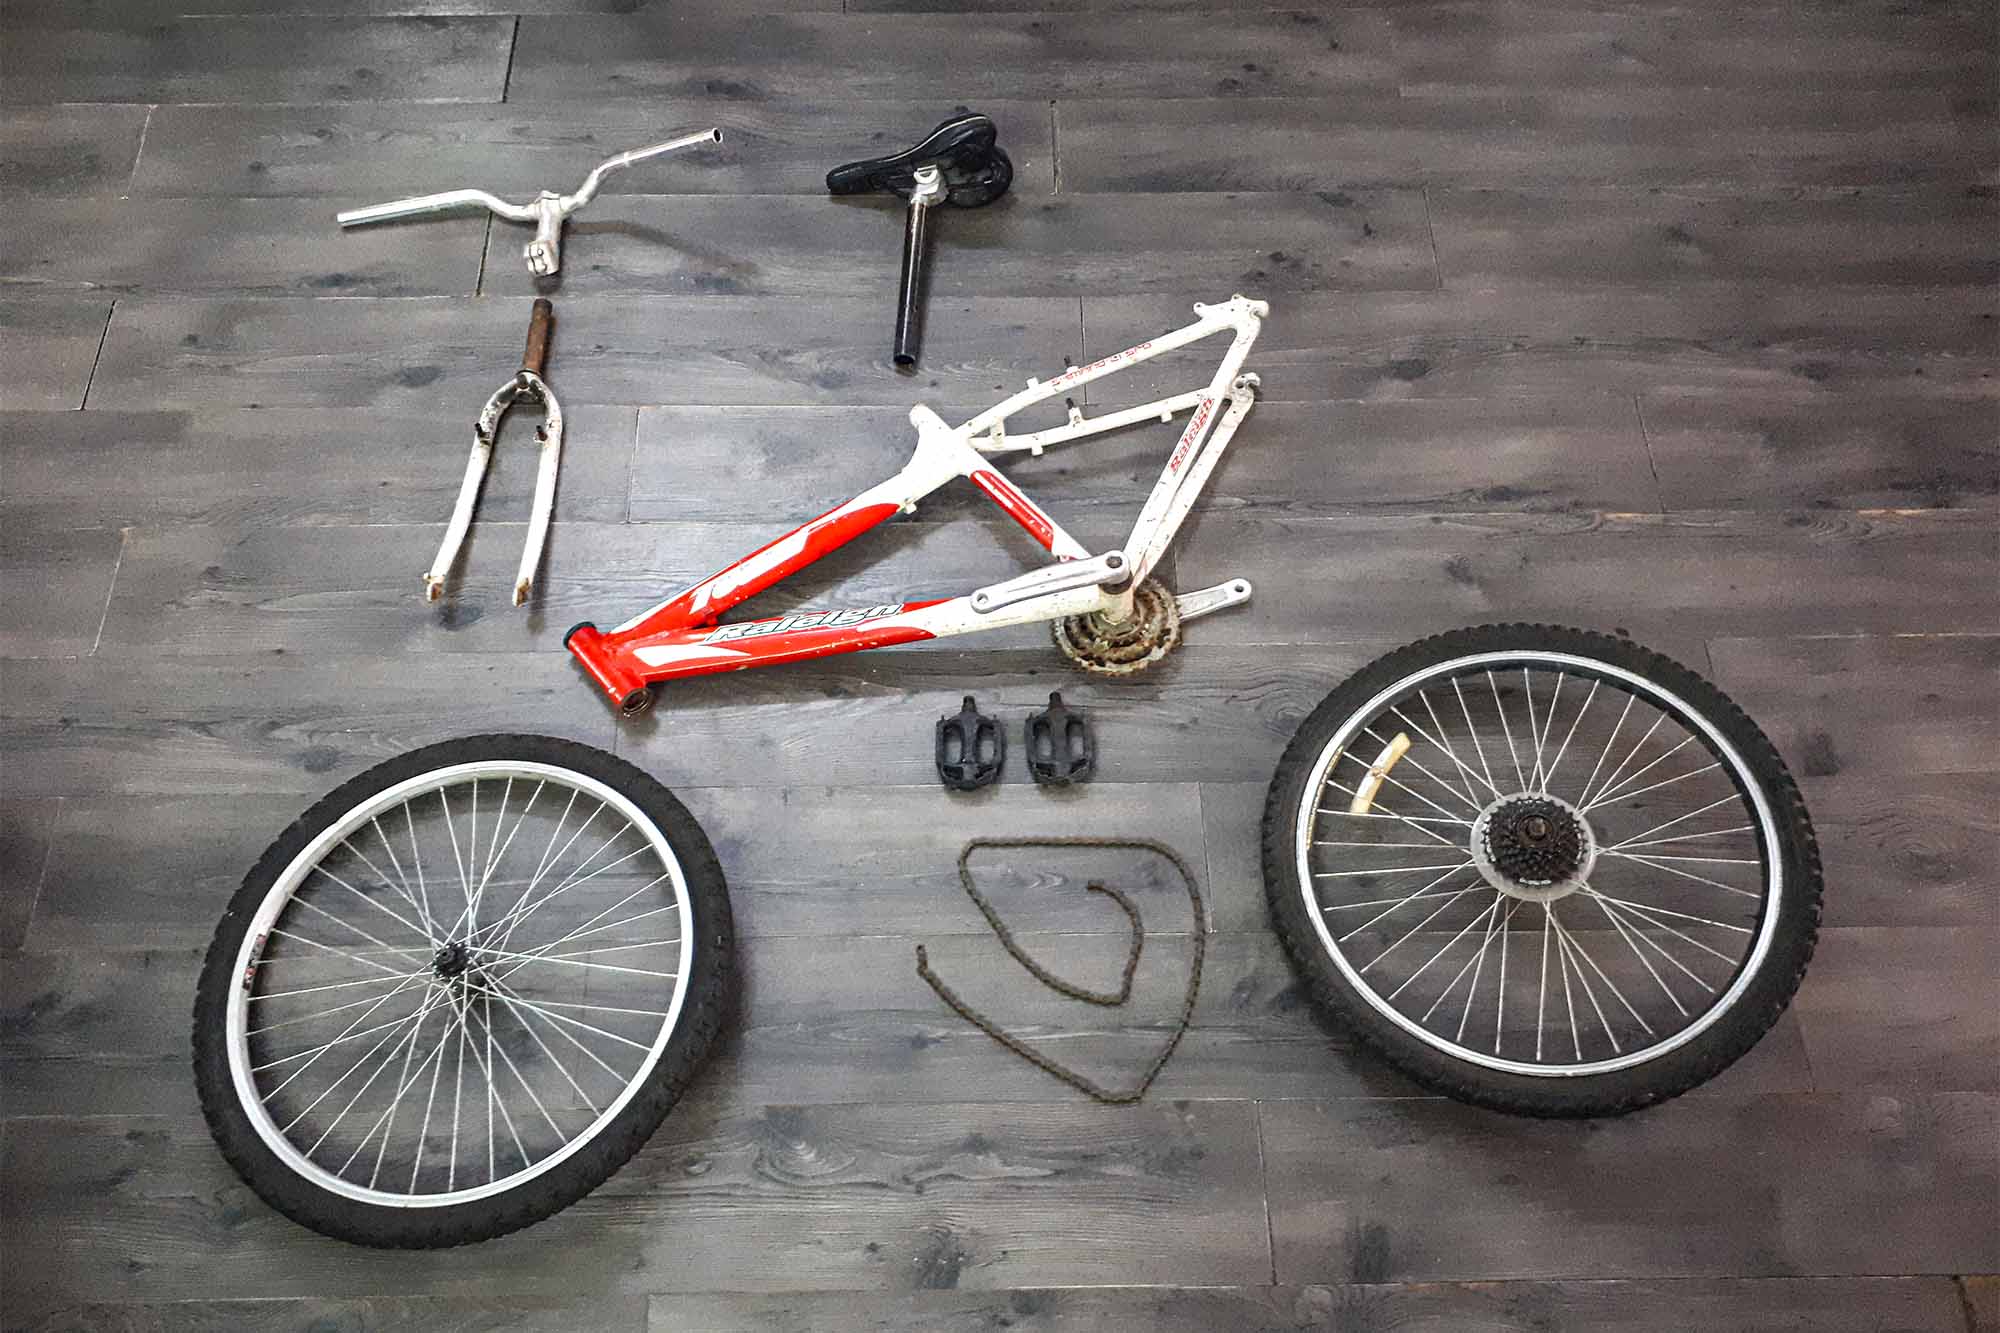 Taking apart, putting back together. “At least once or twice a week I find bikes or parts of bikes in the trash.” (Photo: Raz Rotem. Graphic: Edea)